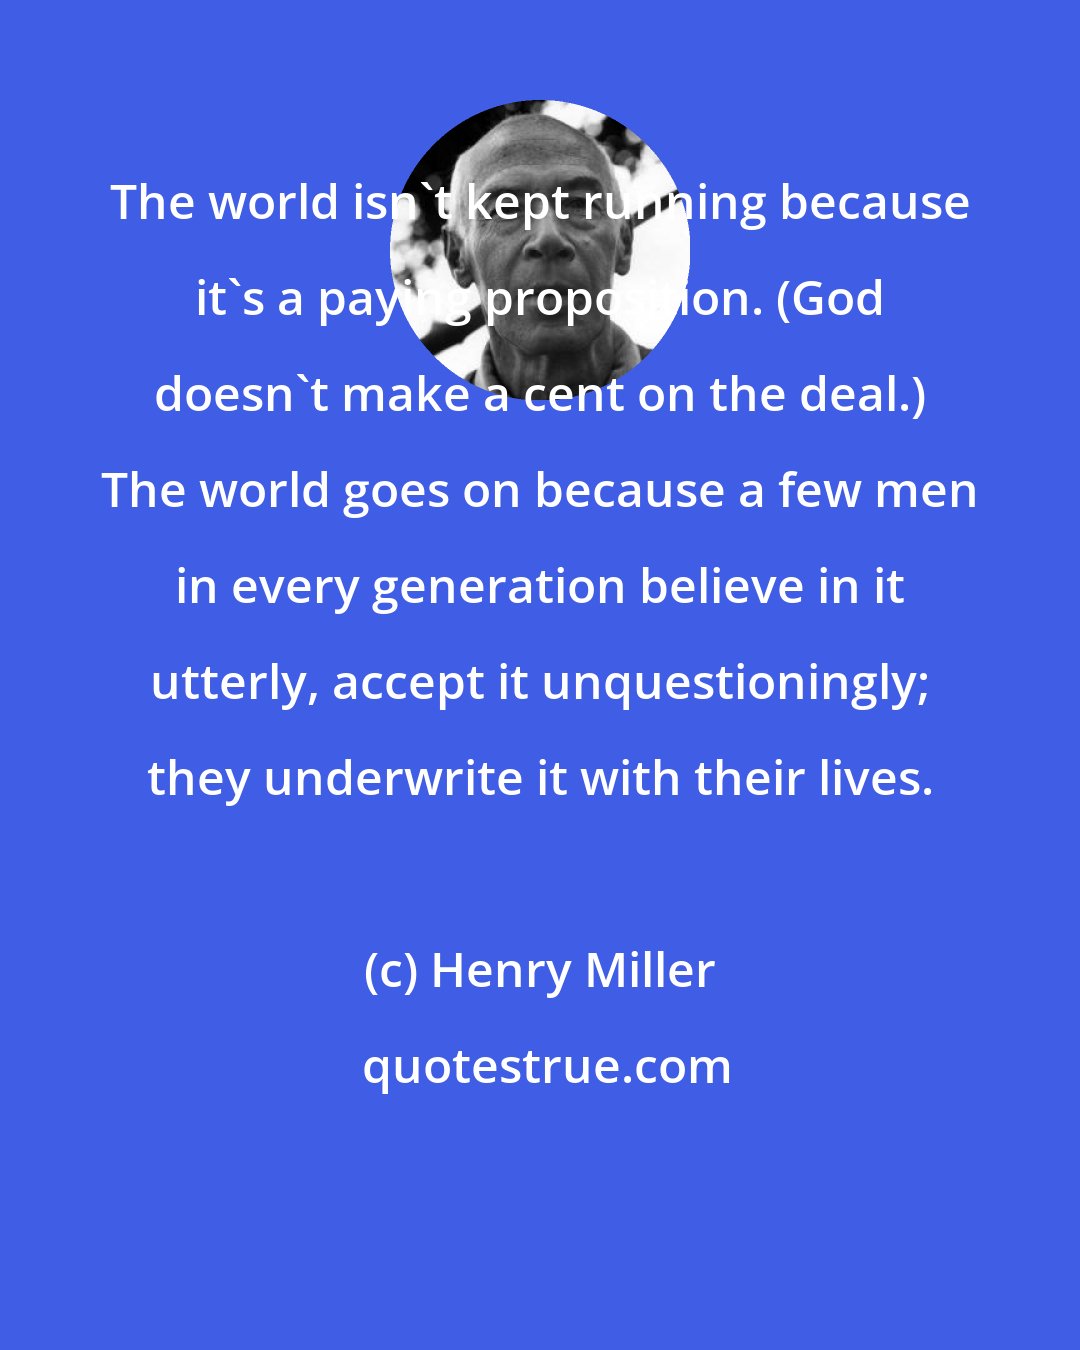 Henry Miller: The world isn't kept running because it's a paying proposition. (God doesn't make a cent on the deal.) The world goes on because a few men in every generation believe in it utterly, accept it unquestioningly; they underwrite it with their lives.